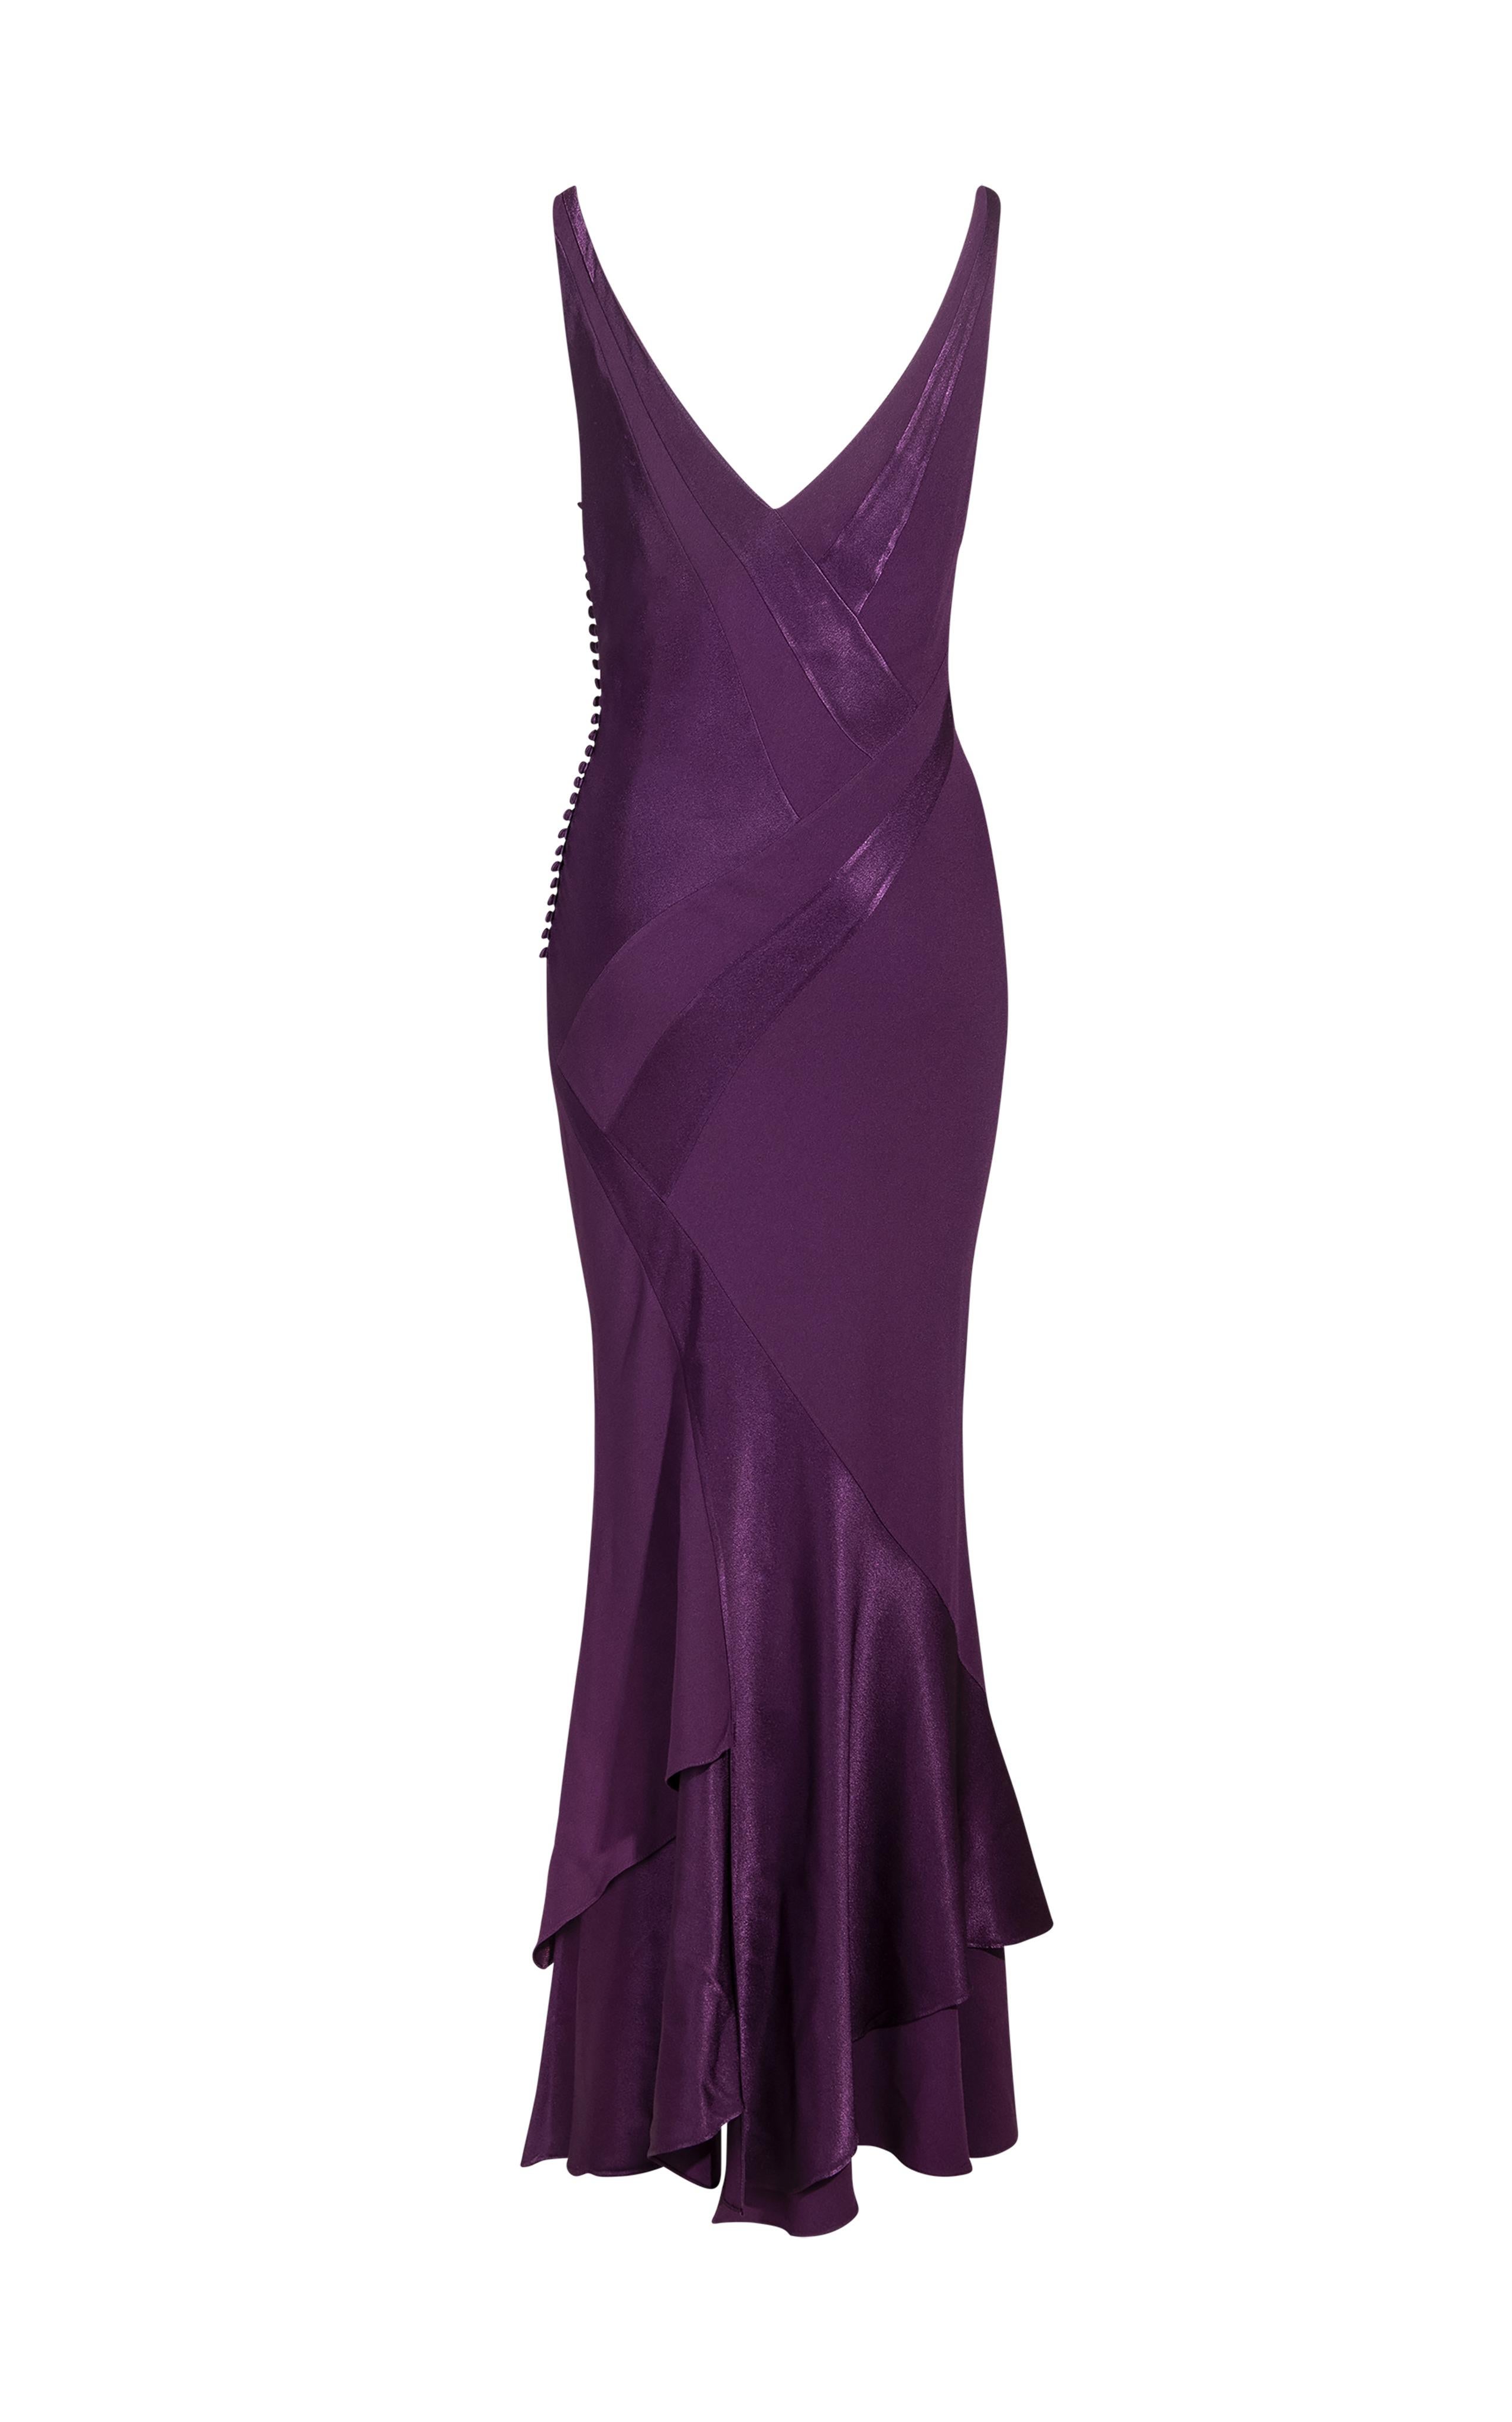 S/S 2005 Christian Dior by John Galliano Purple V-Neck Gown In Good Condition In North Hollywood, CA